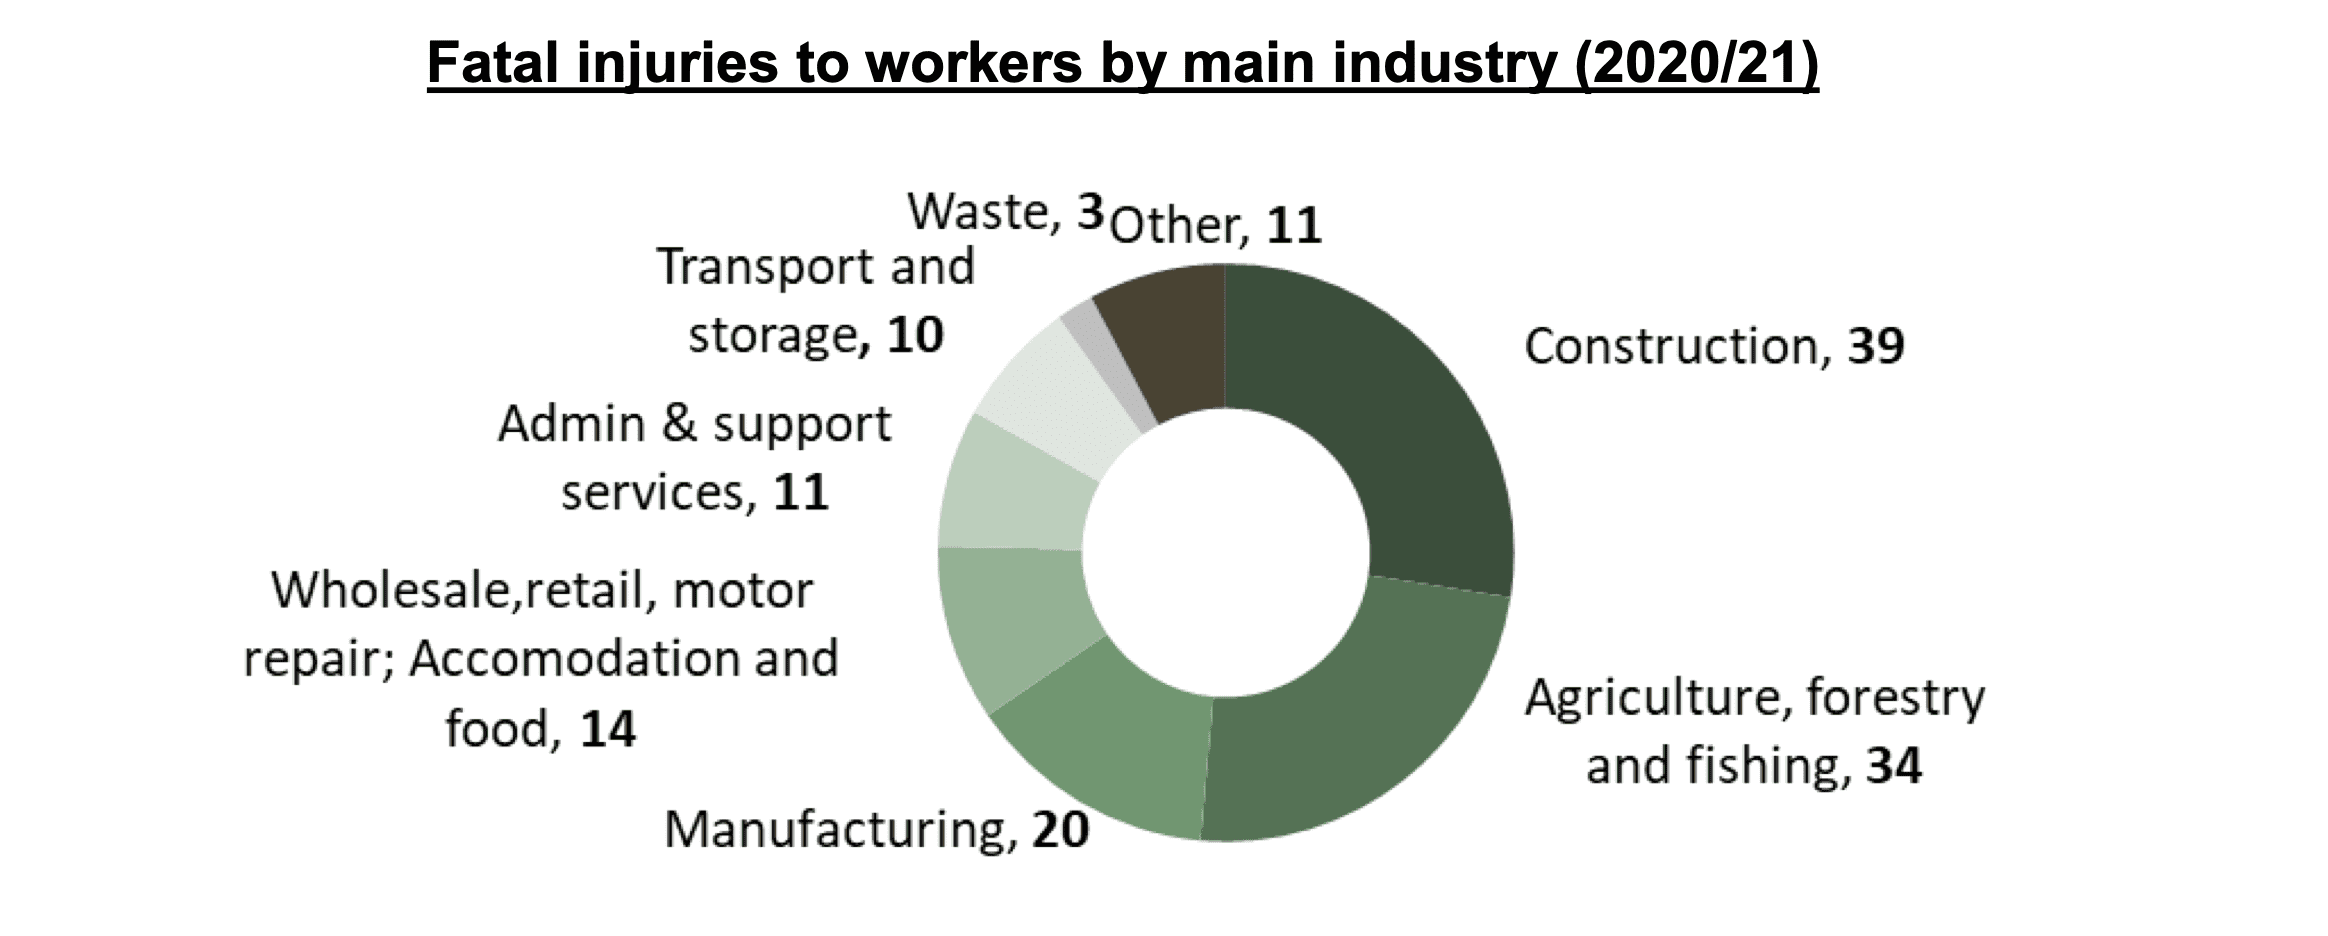 Fatal injuries to workers by main industry